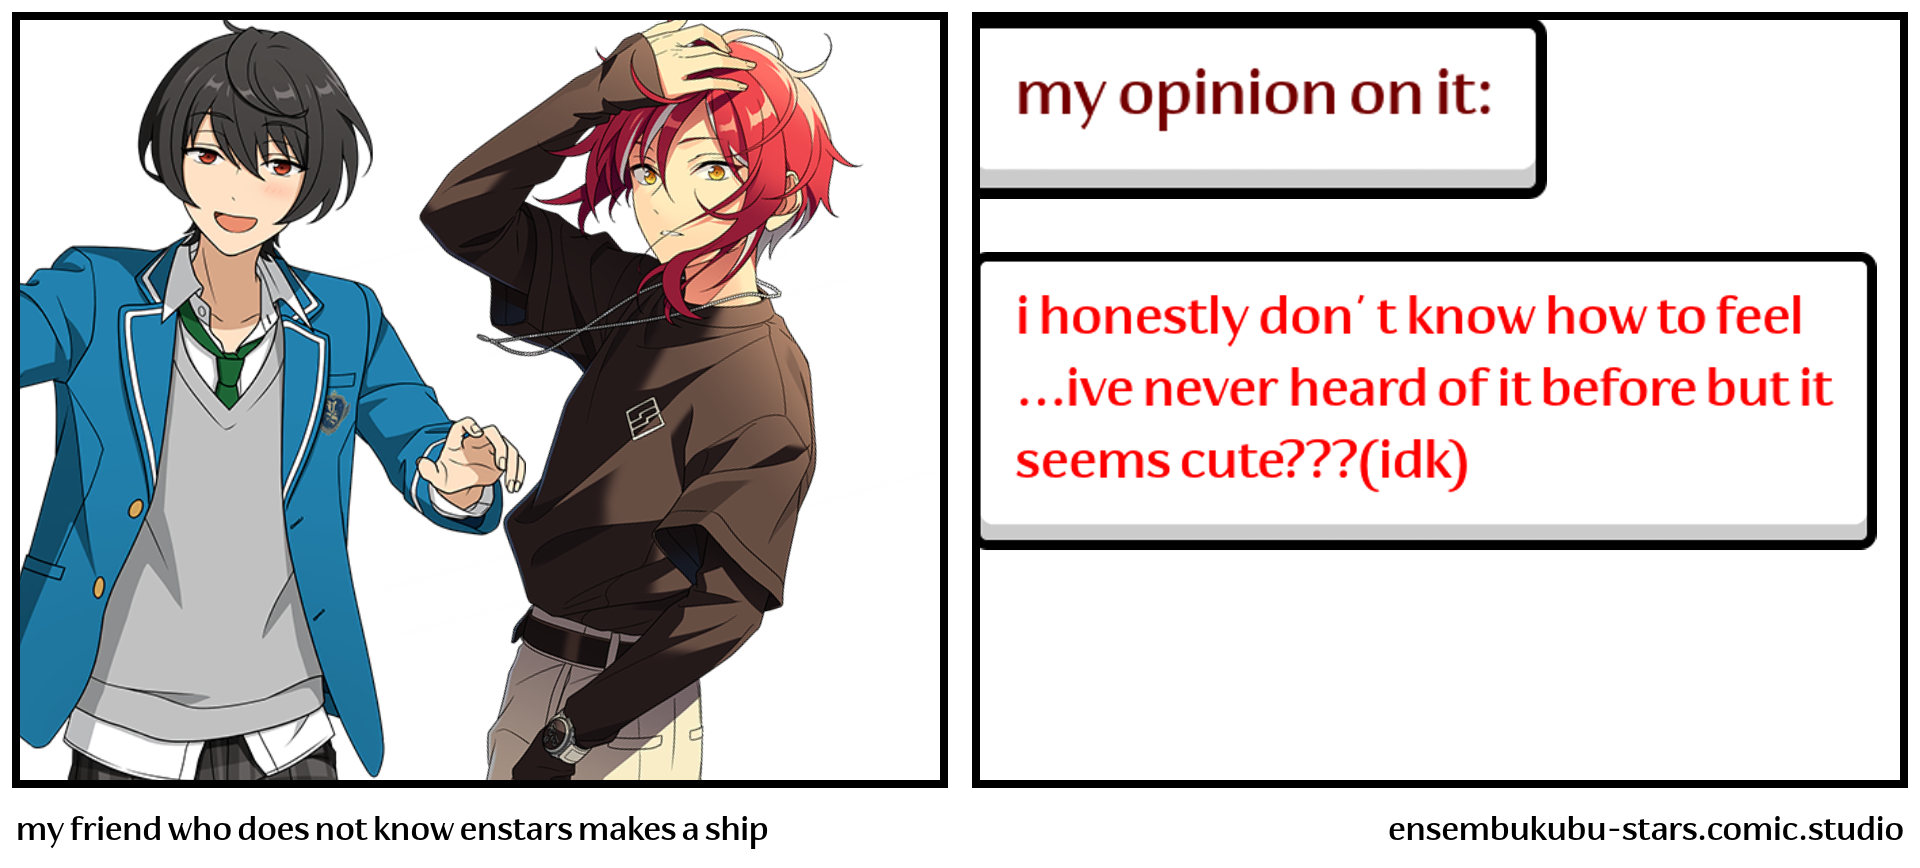 my friend who does not know enstars makes a ship